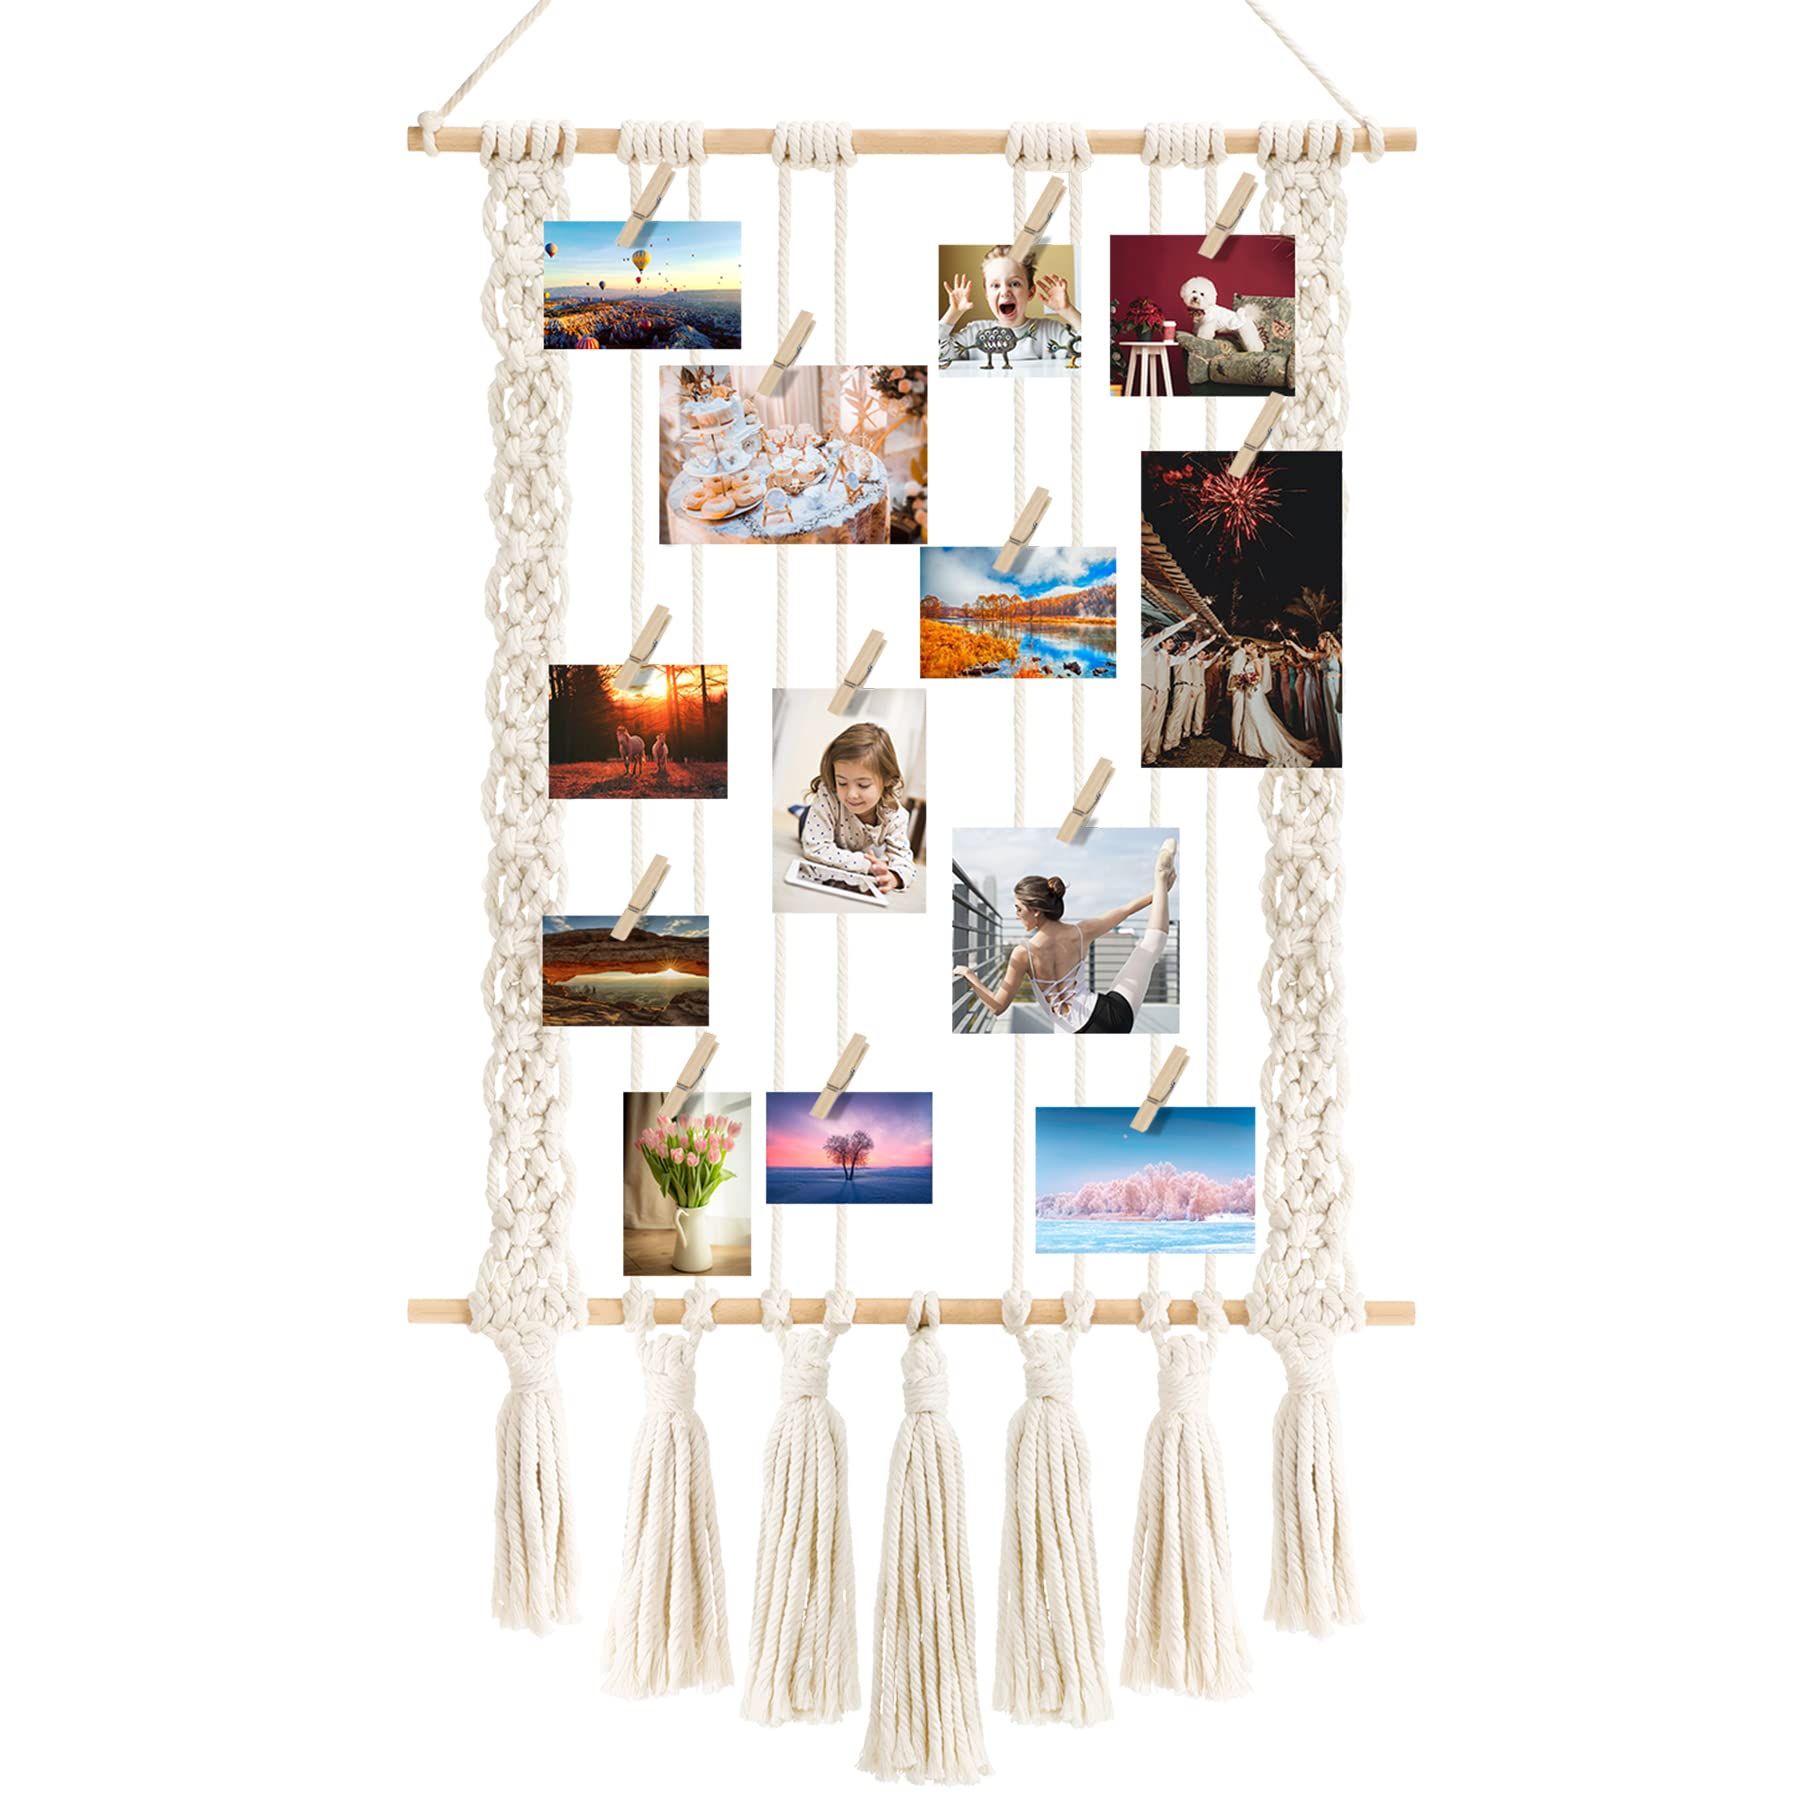 FEBSNOW Hanging Photo Display Macrame Wall Hanging Pictures Organizer Cards Holder Frame Collage Set | Amazon (US)